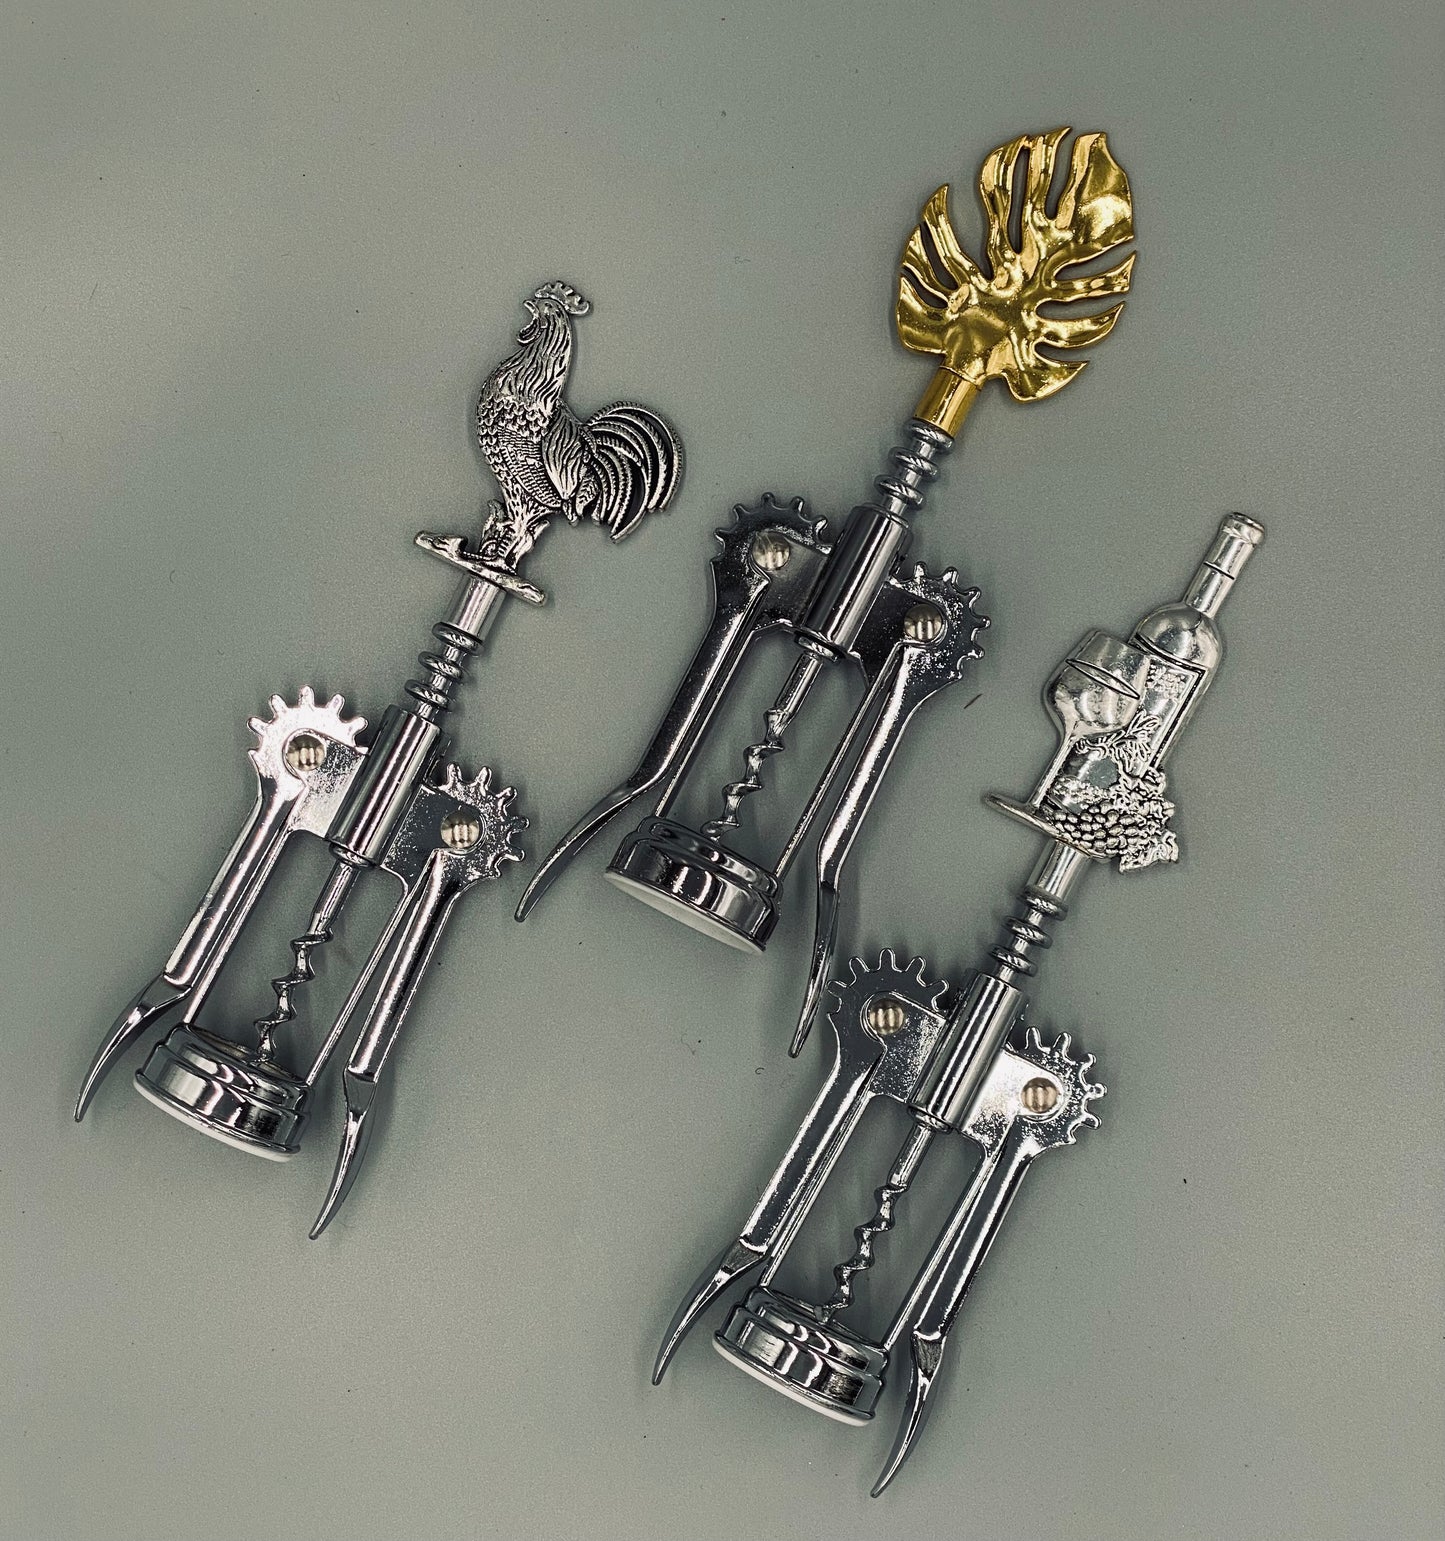 Stainless Steel Winged Corkscrew Various Designs